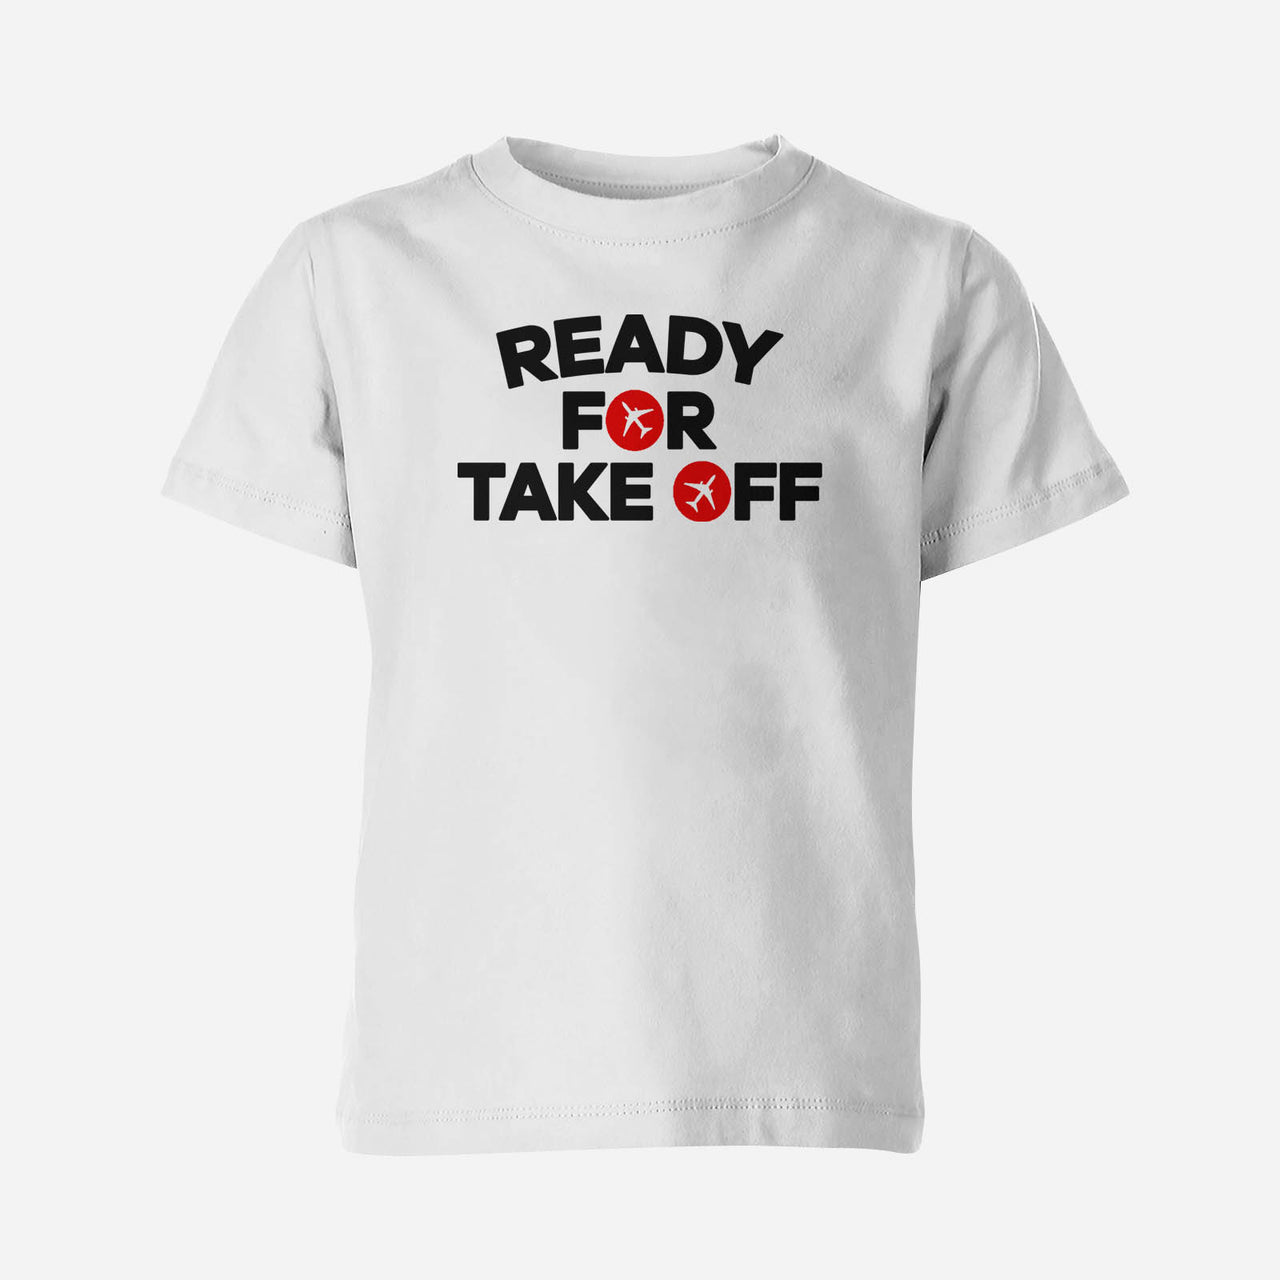 Ready For Takeoff Designed Children T-Shirts